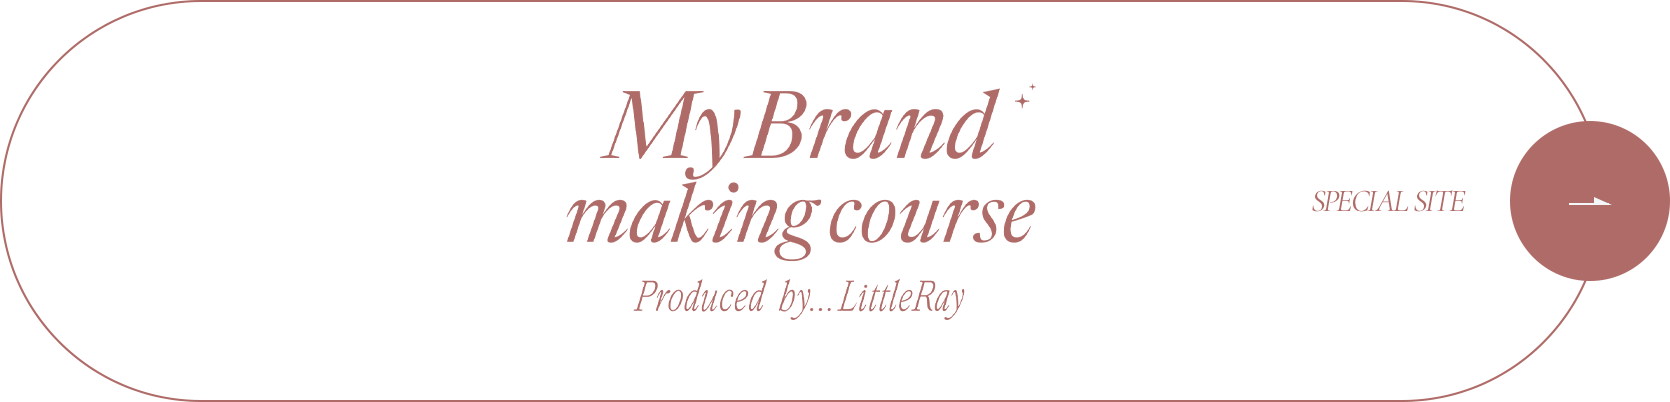 MY BLAND MAKING COURSE